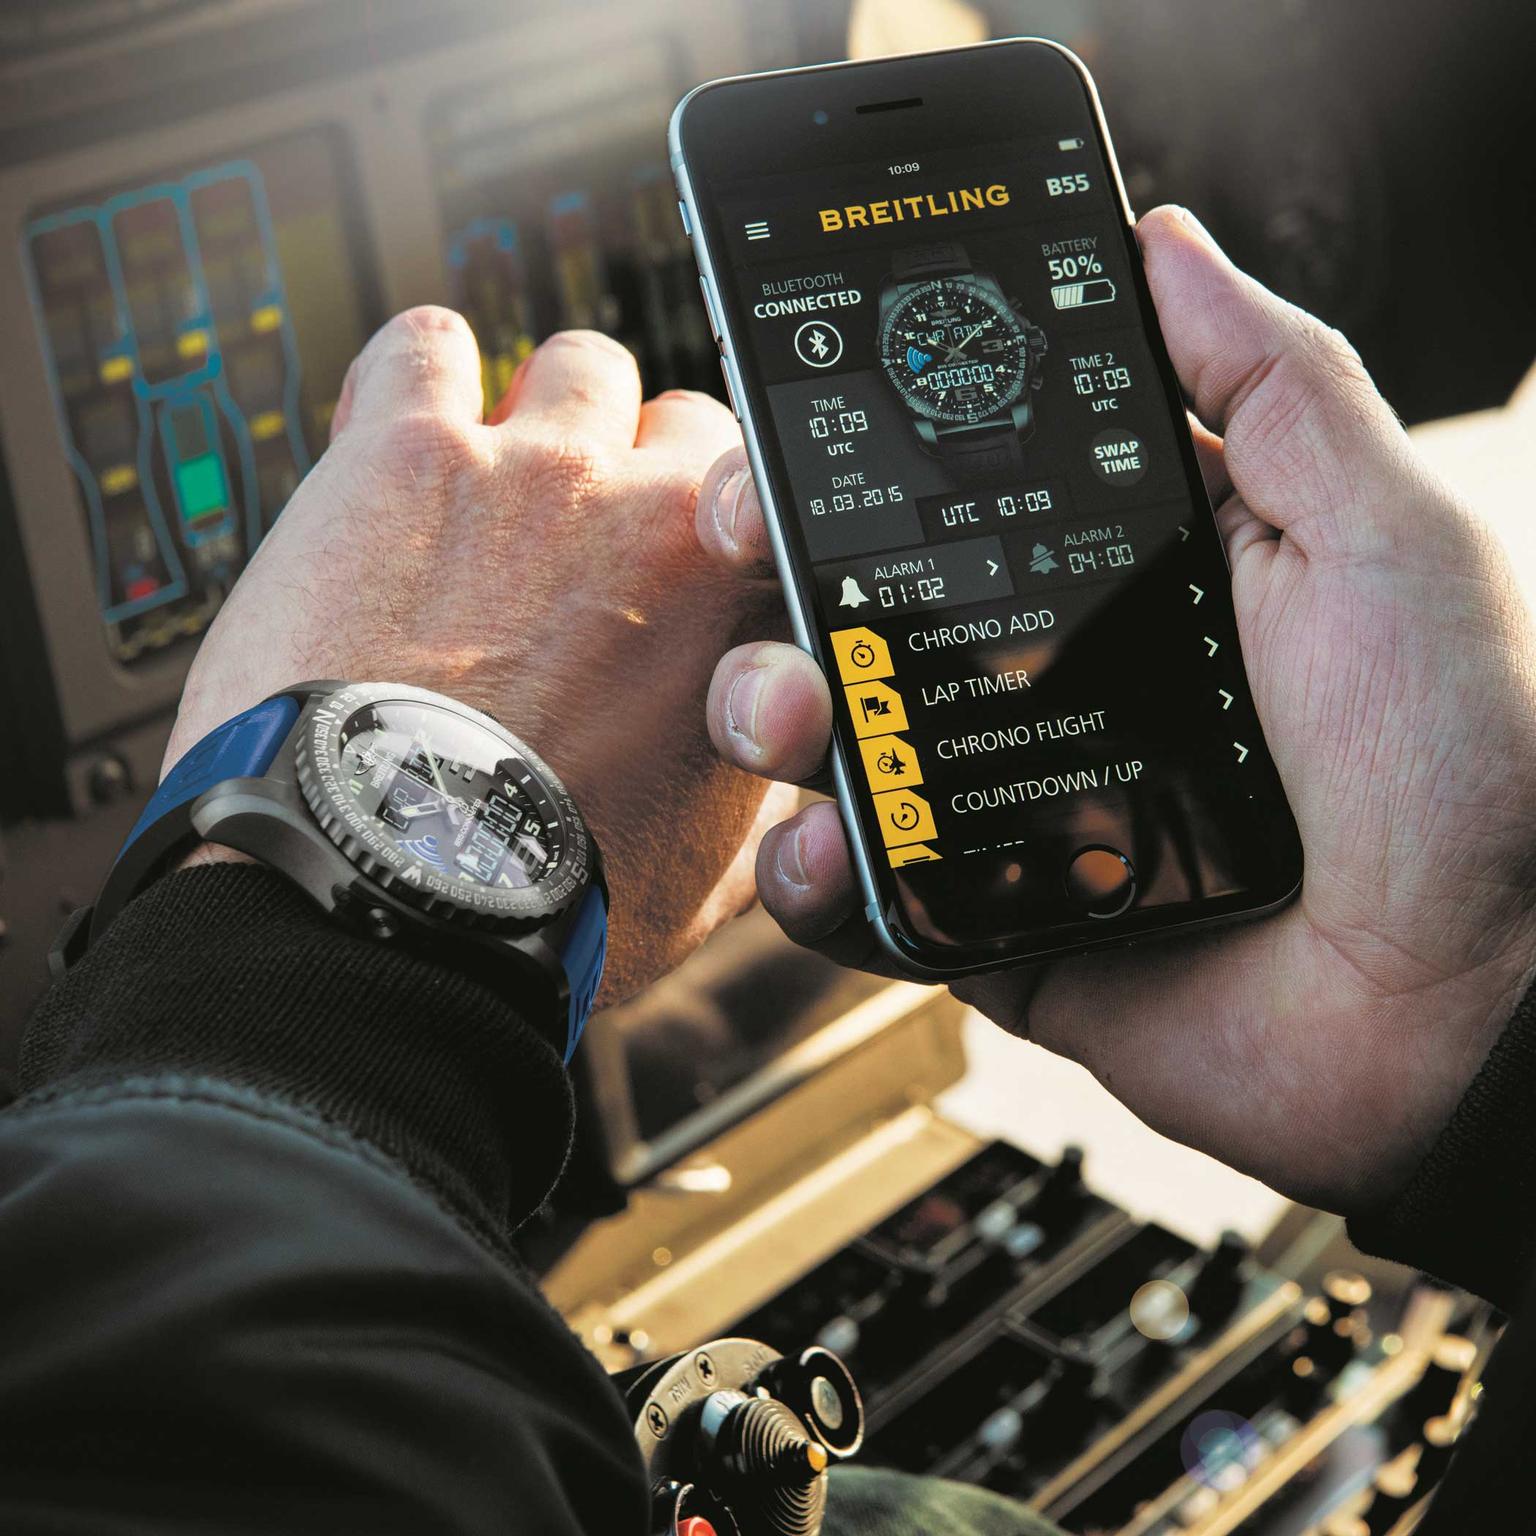 Breitling B55 Connected smartwatch